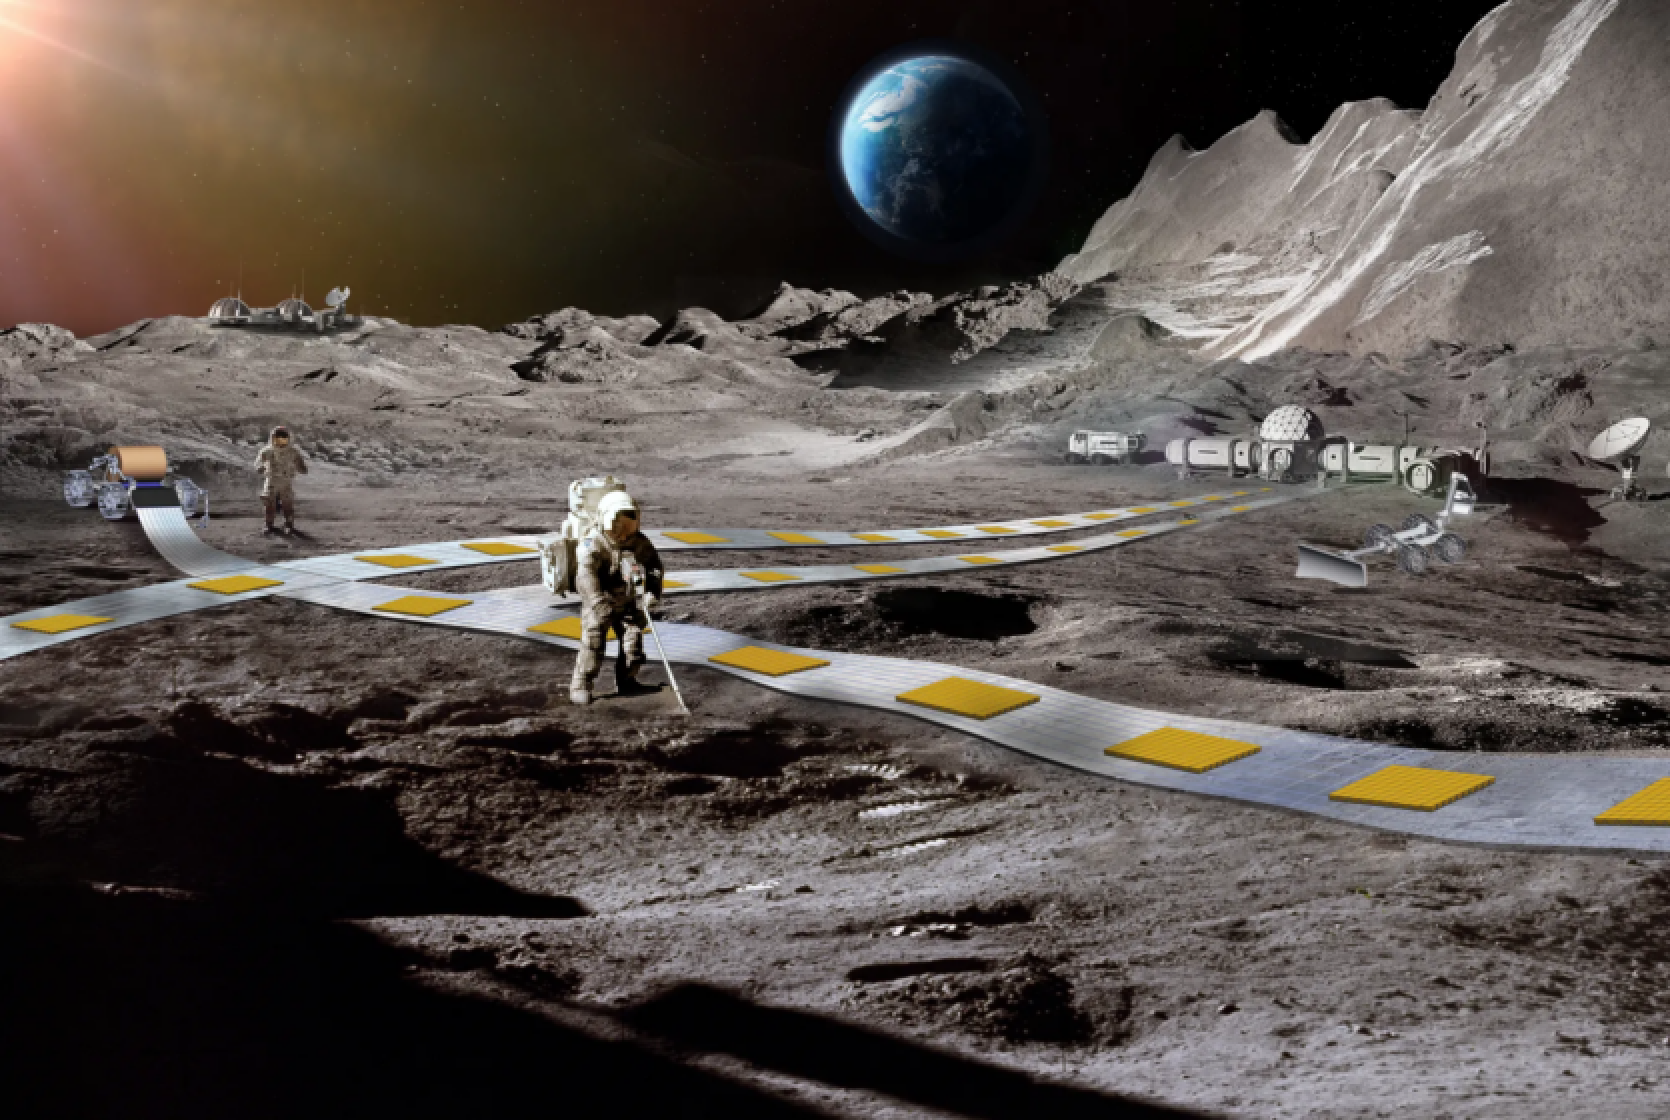 Forget Earth - NASA plans to launch a robotic maglev on the moon in the 2030s